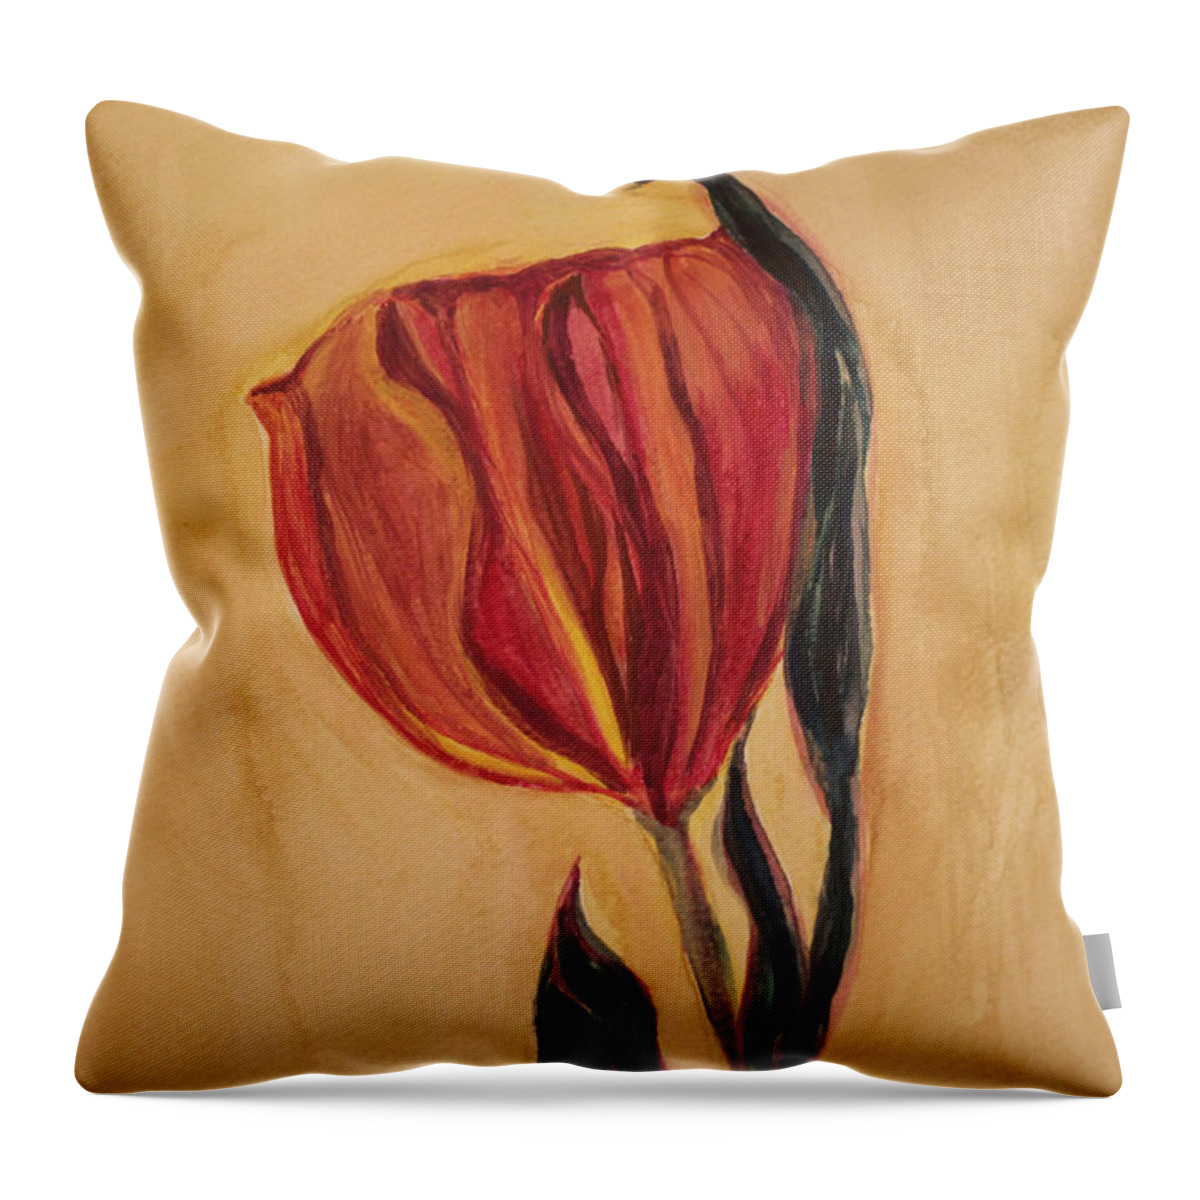 Watercolor Throw Pillow featuring the painting Flor Del Alma by The Art Of Marilyn Ridoutt-Greene